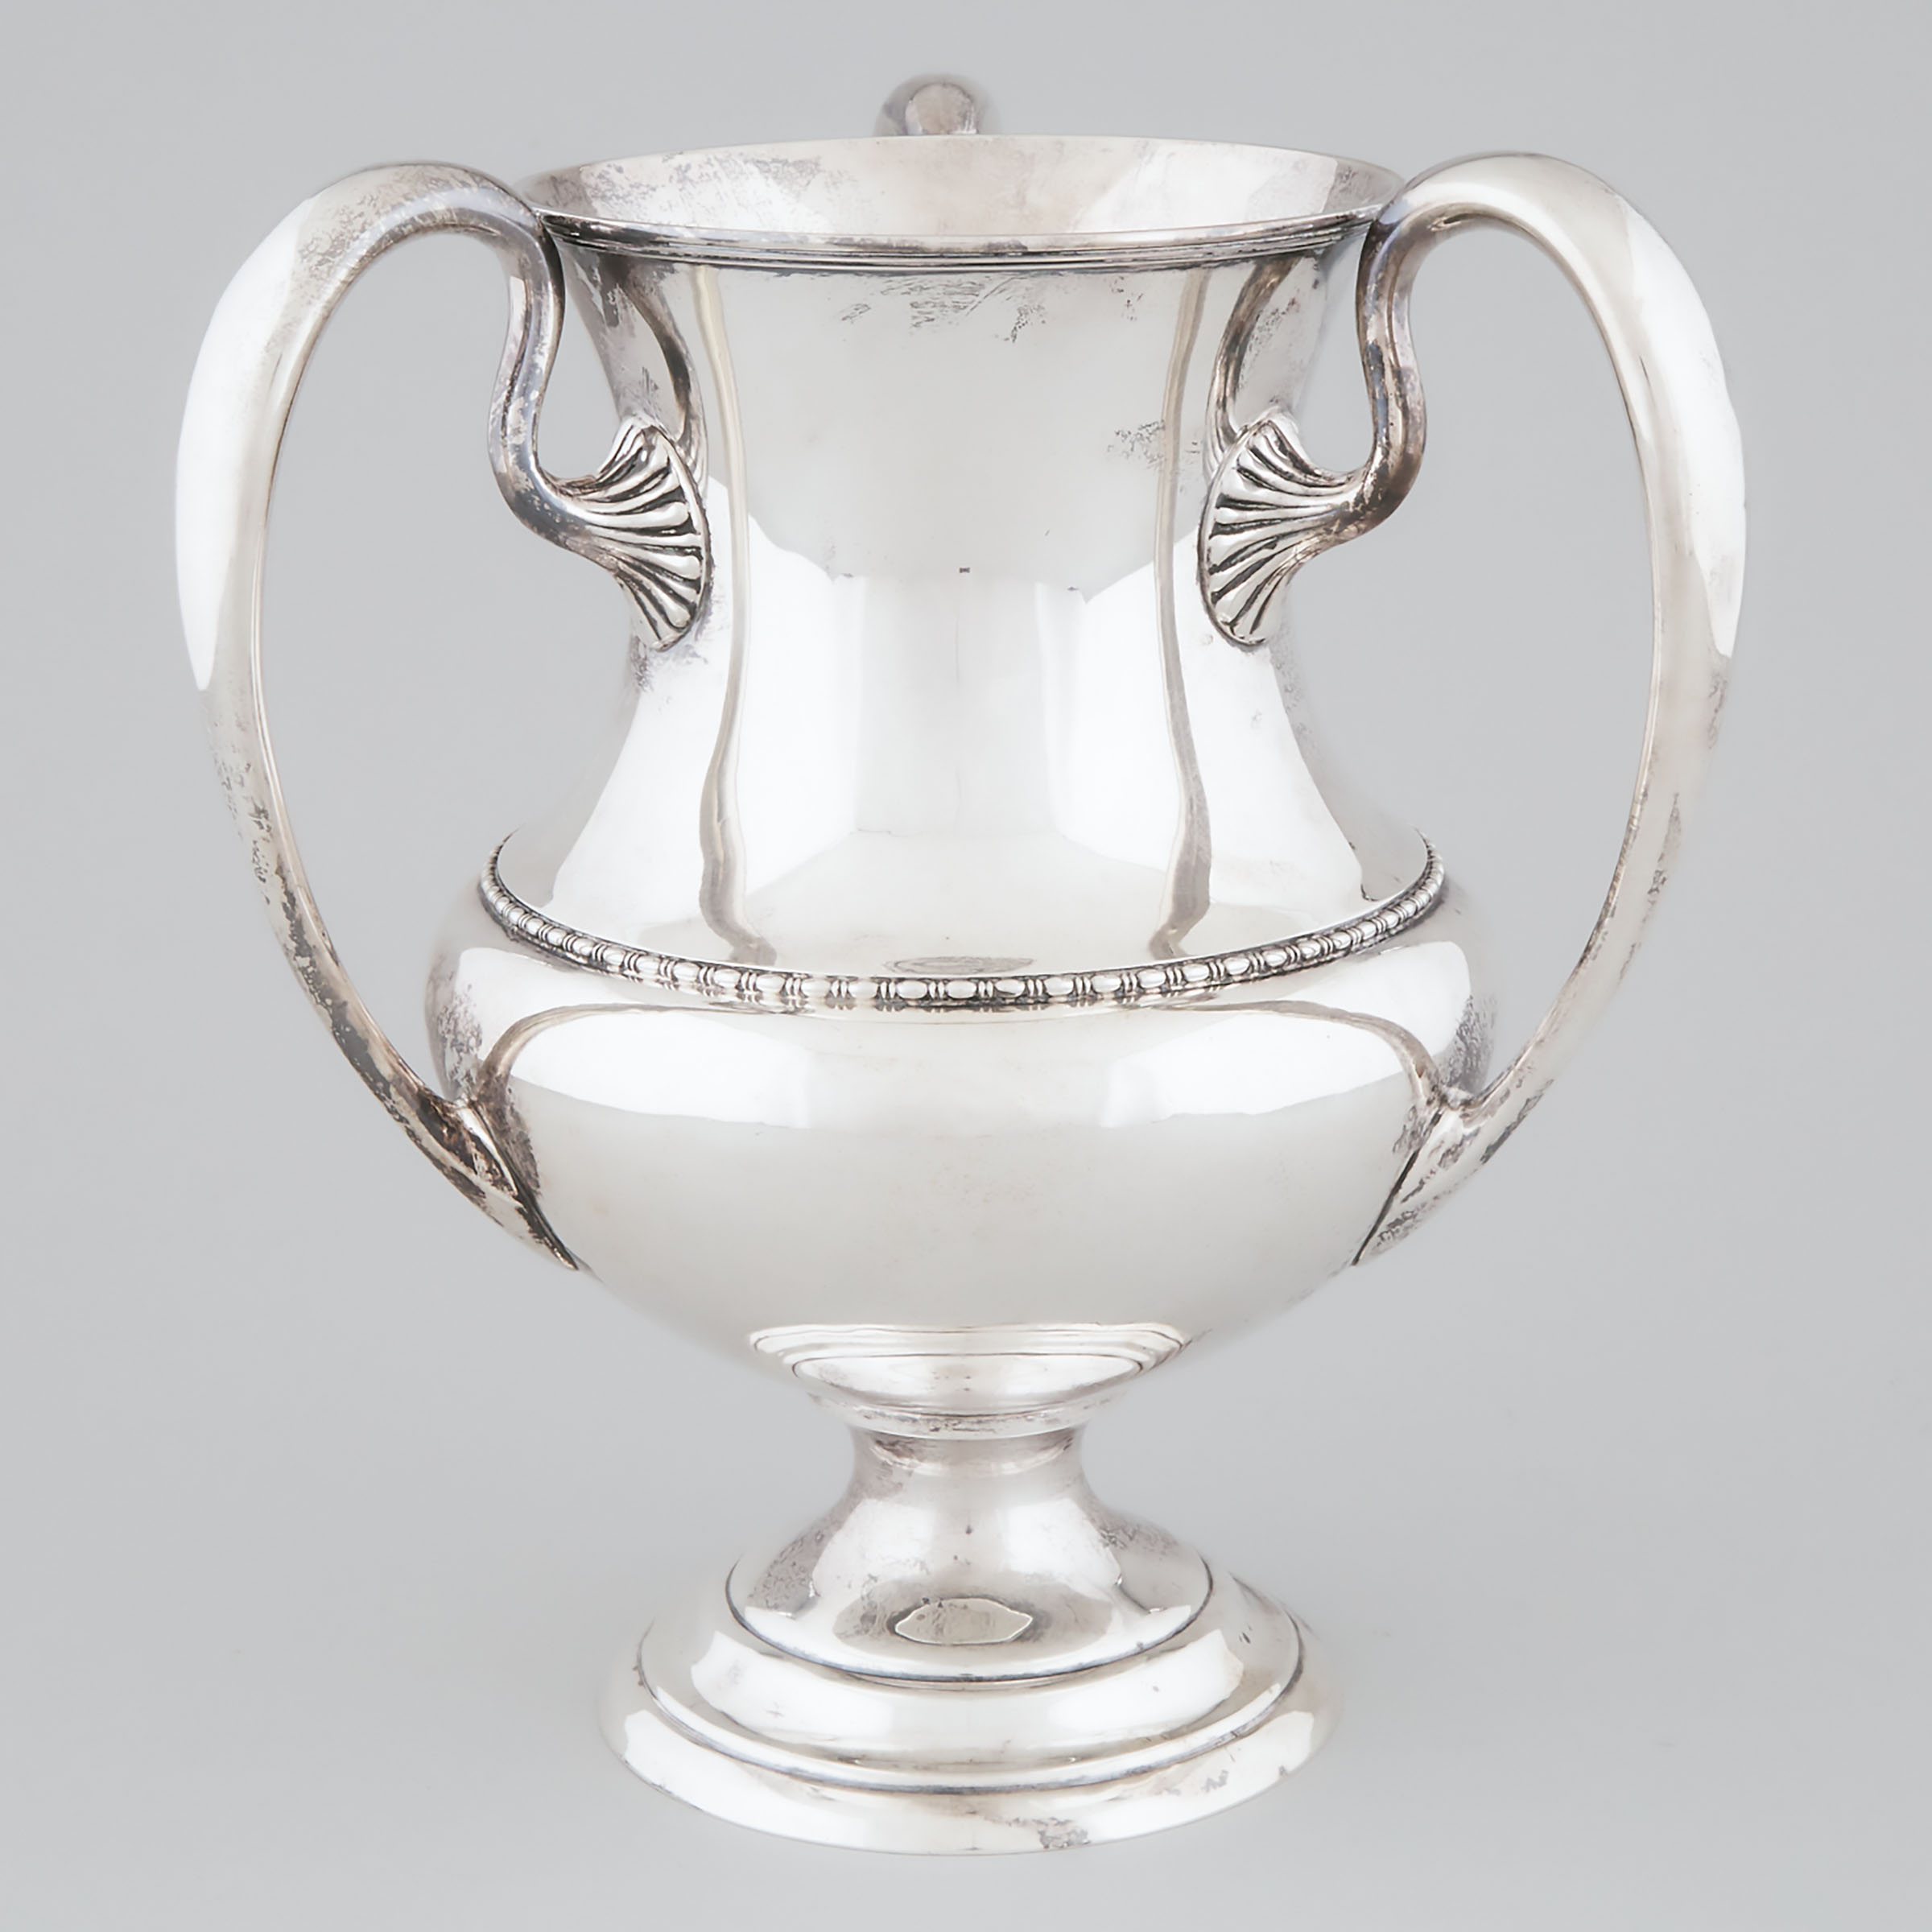 American Silver Three-Handled Large Cup, Goodnow & Jenks, Boston, Mass., early 20th century